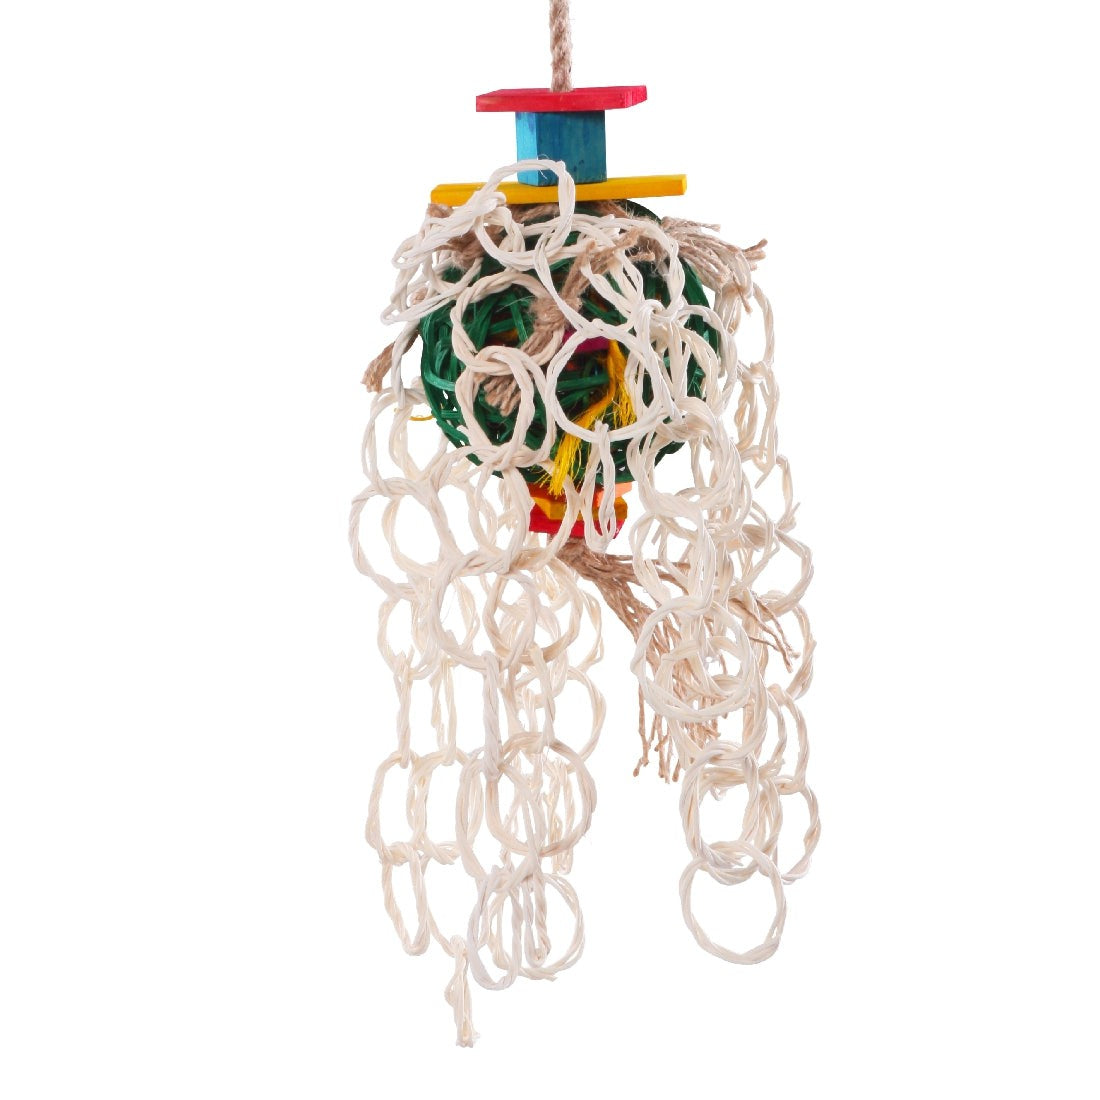 Colorful hanging bird toy with knotted ropes and wooden beads.